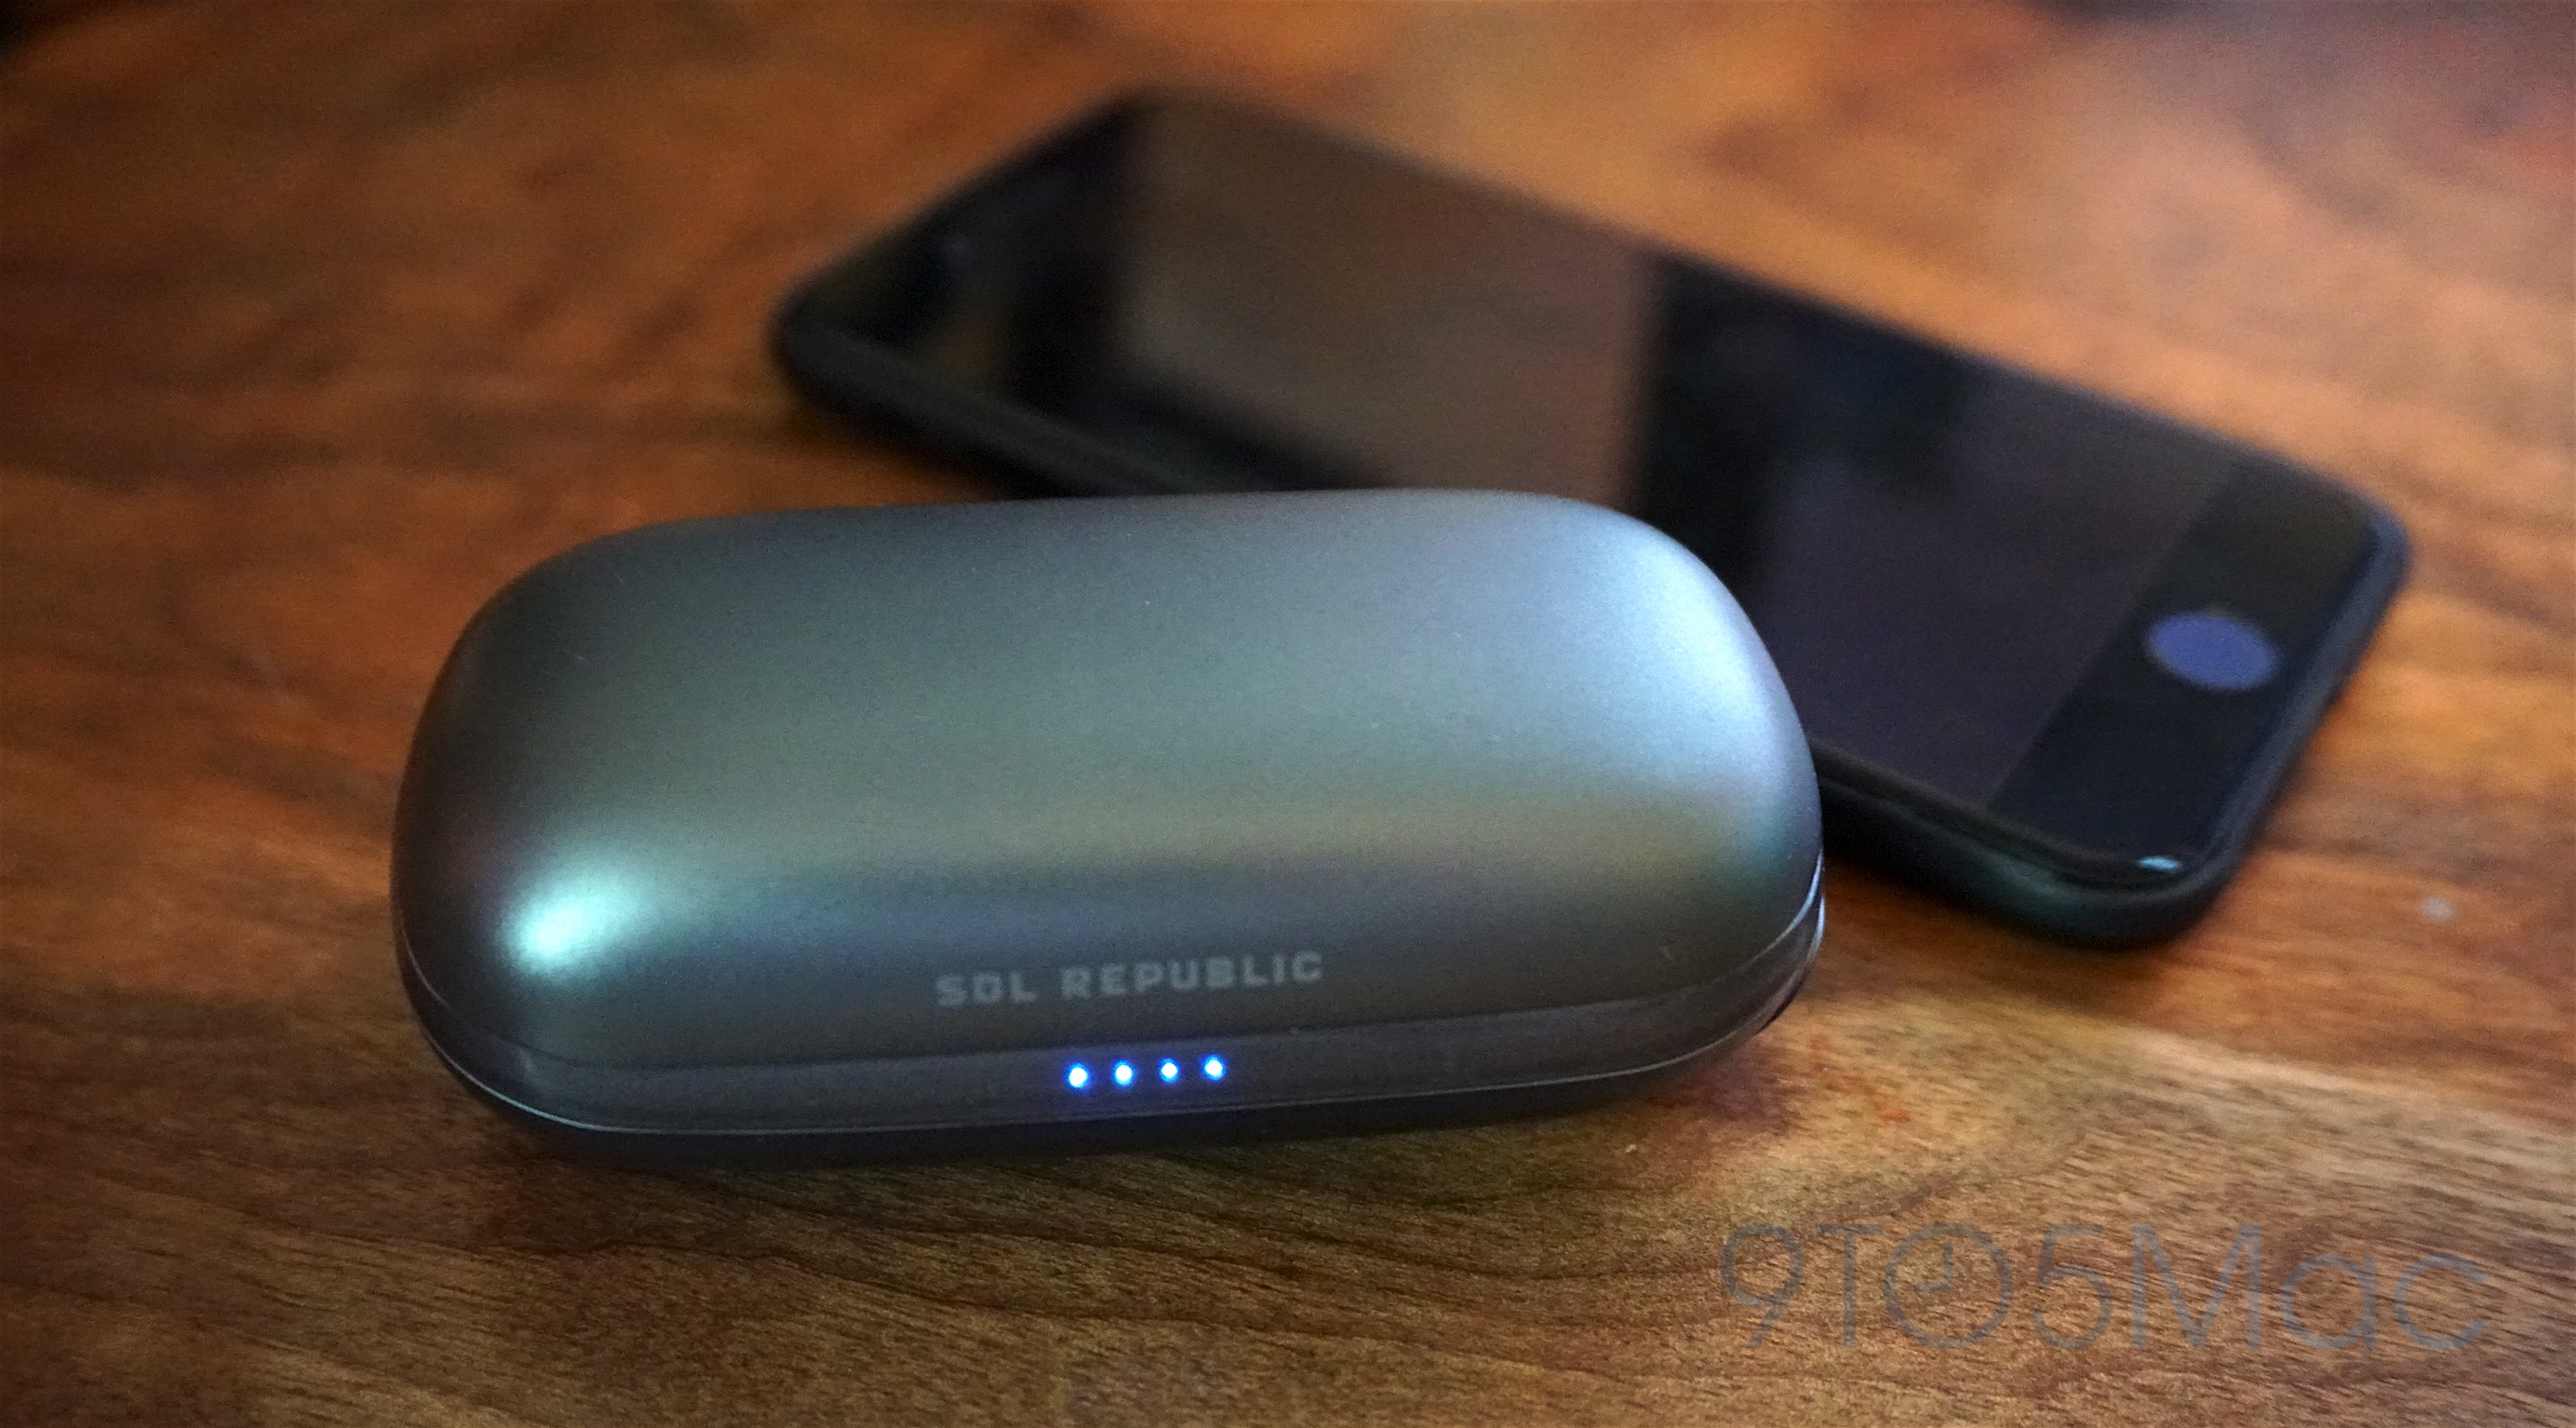  SOL REPUBLIC Amps Air Totally Wireless Bluetooth